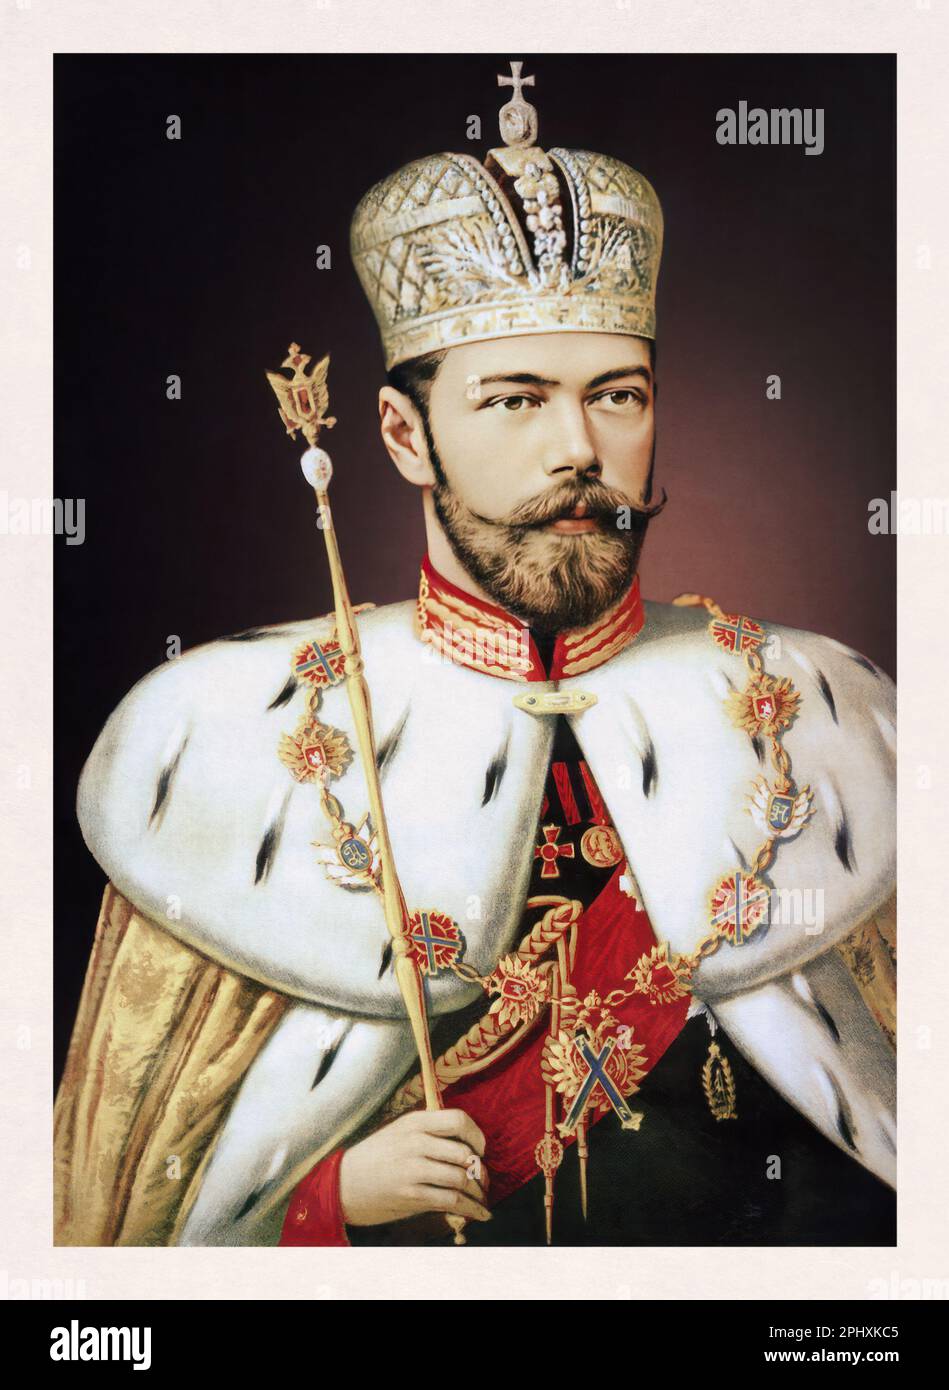 Portrait of Nicholas II of Russia in his coronation robe with Imperial Crown and Sceptre painted in 1896 by Aleksandr Makovsky. Stock Photo